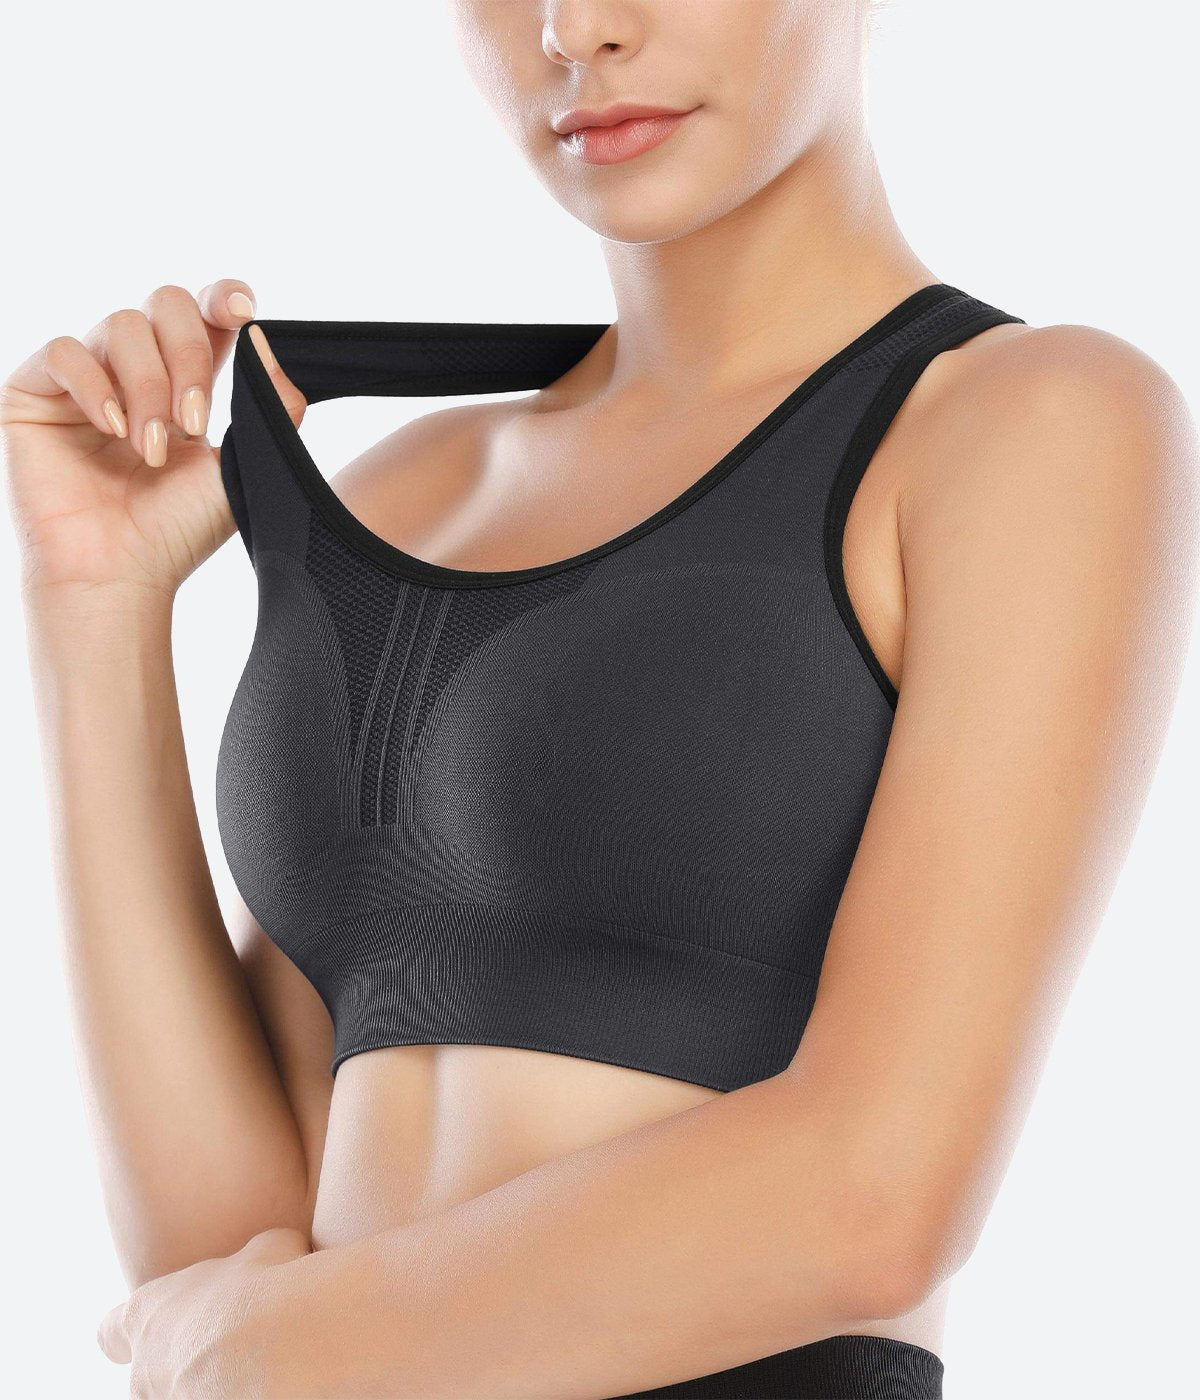 Racerback Padded Non-Wired High Impact Sports Bra - Gibraltar Sea